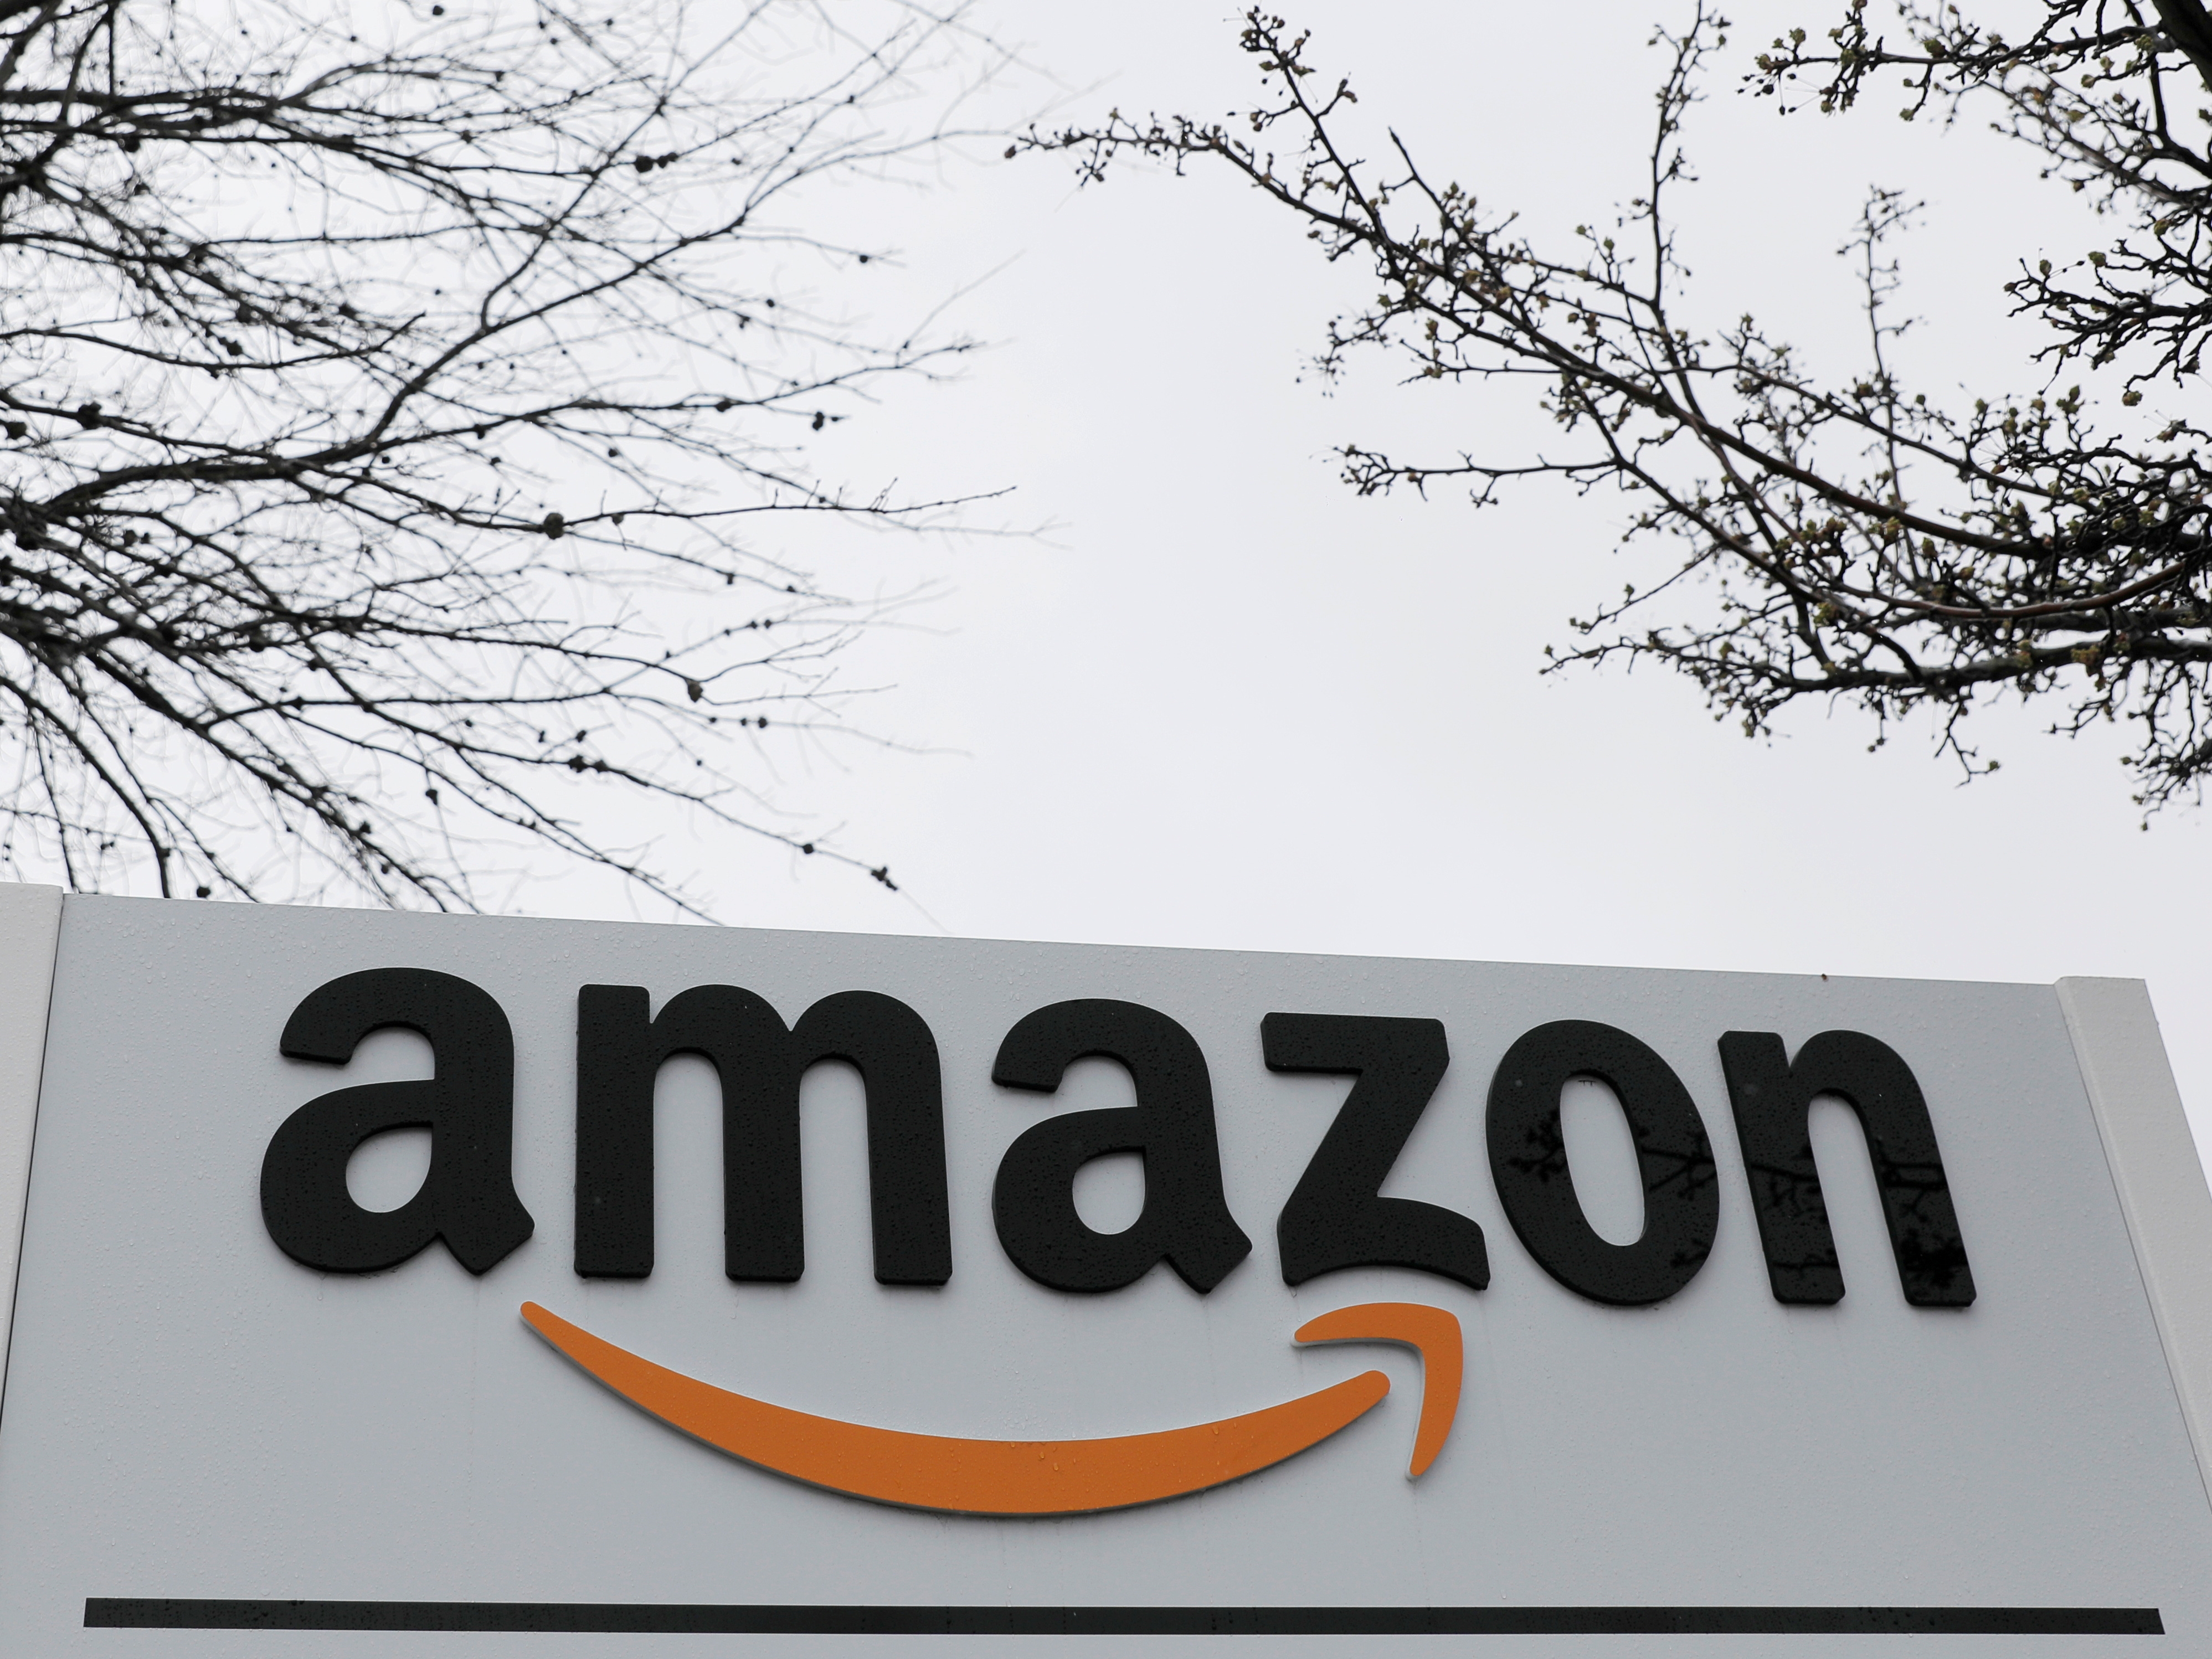 Signage is seen at an Amazon facility in Bethpage on Long Island in New York, U.S., March 17, 2020. REUTERS/Andrew Kelly/File Photo